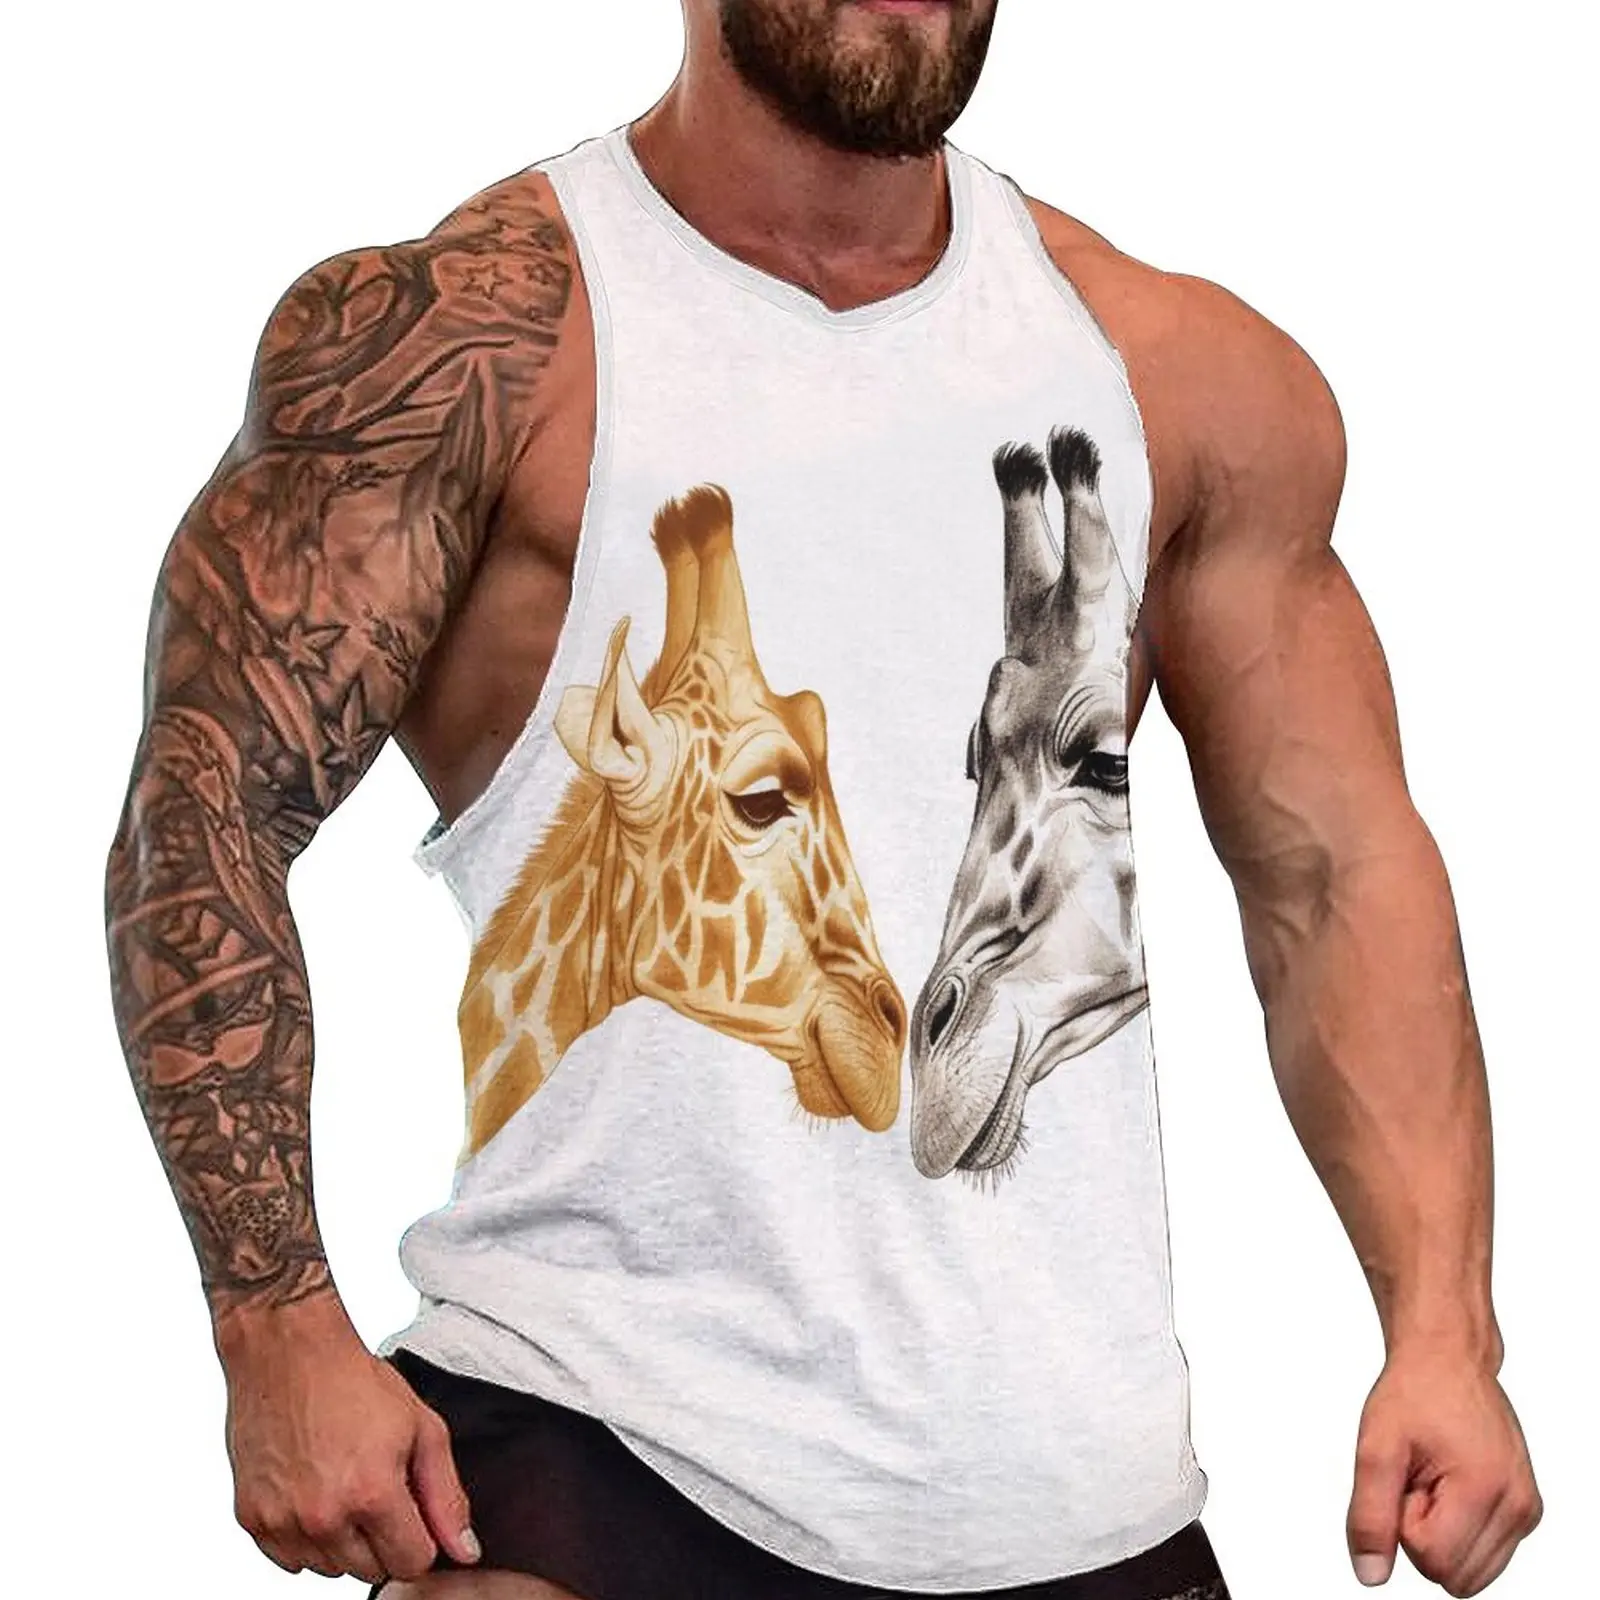 

Giraffe Tank Top Males Two Sides To Face Sketch Bodybuilding Oversize Tops Beach Sportswear Graphic Sleeveless Shirts